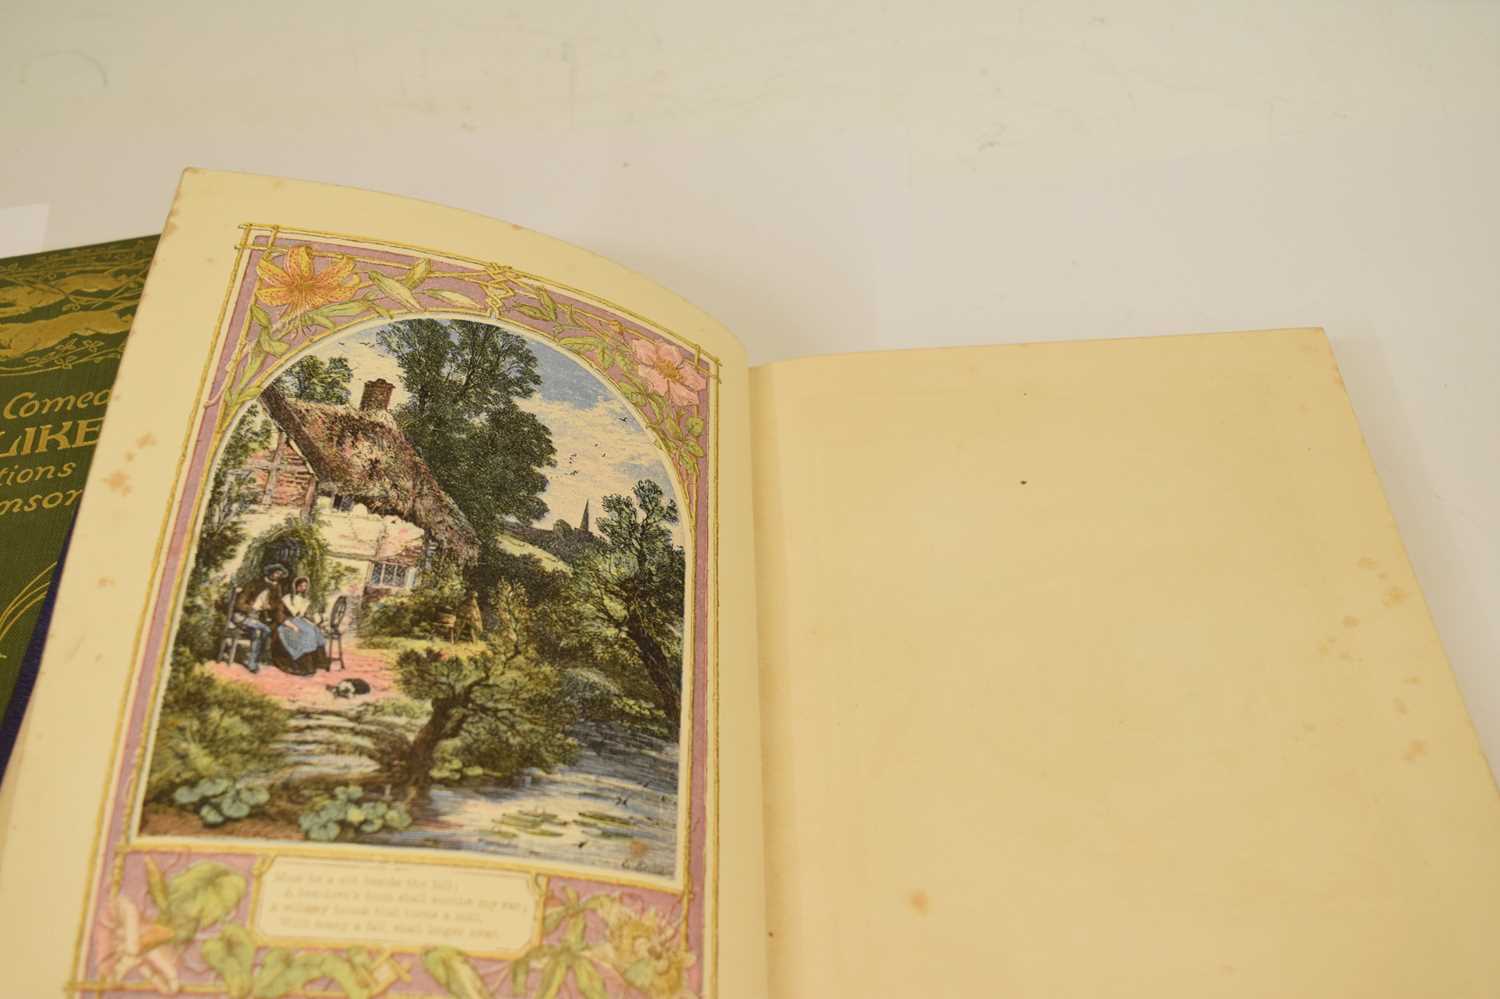 Potter, Beatrix - 'Cecily Parsley's Nursery Rhymes' - First edition - Image 35 of 37